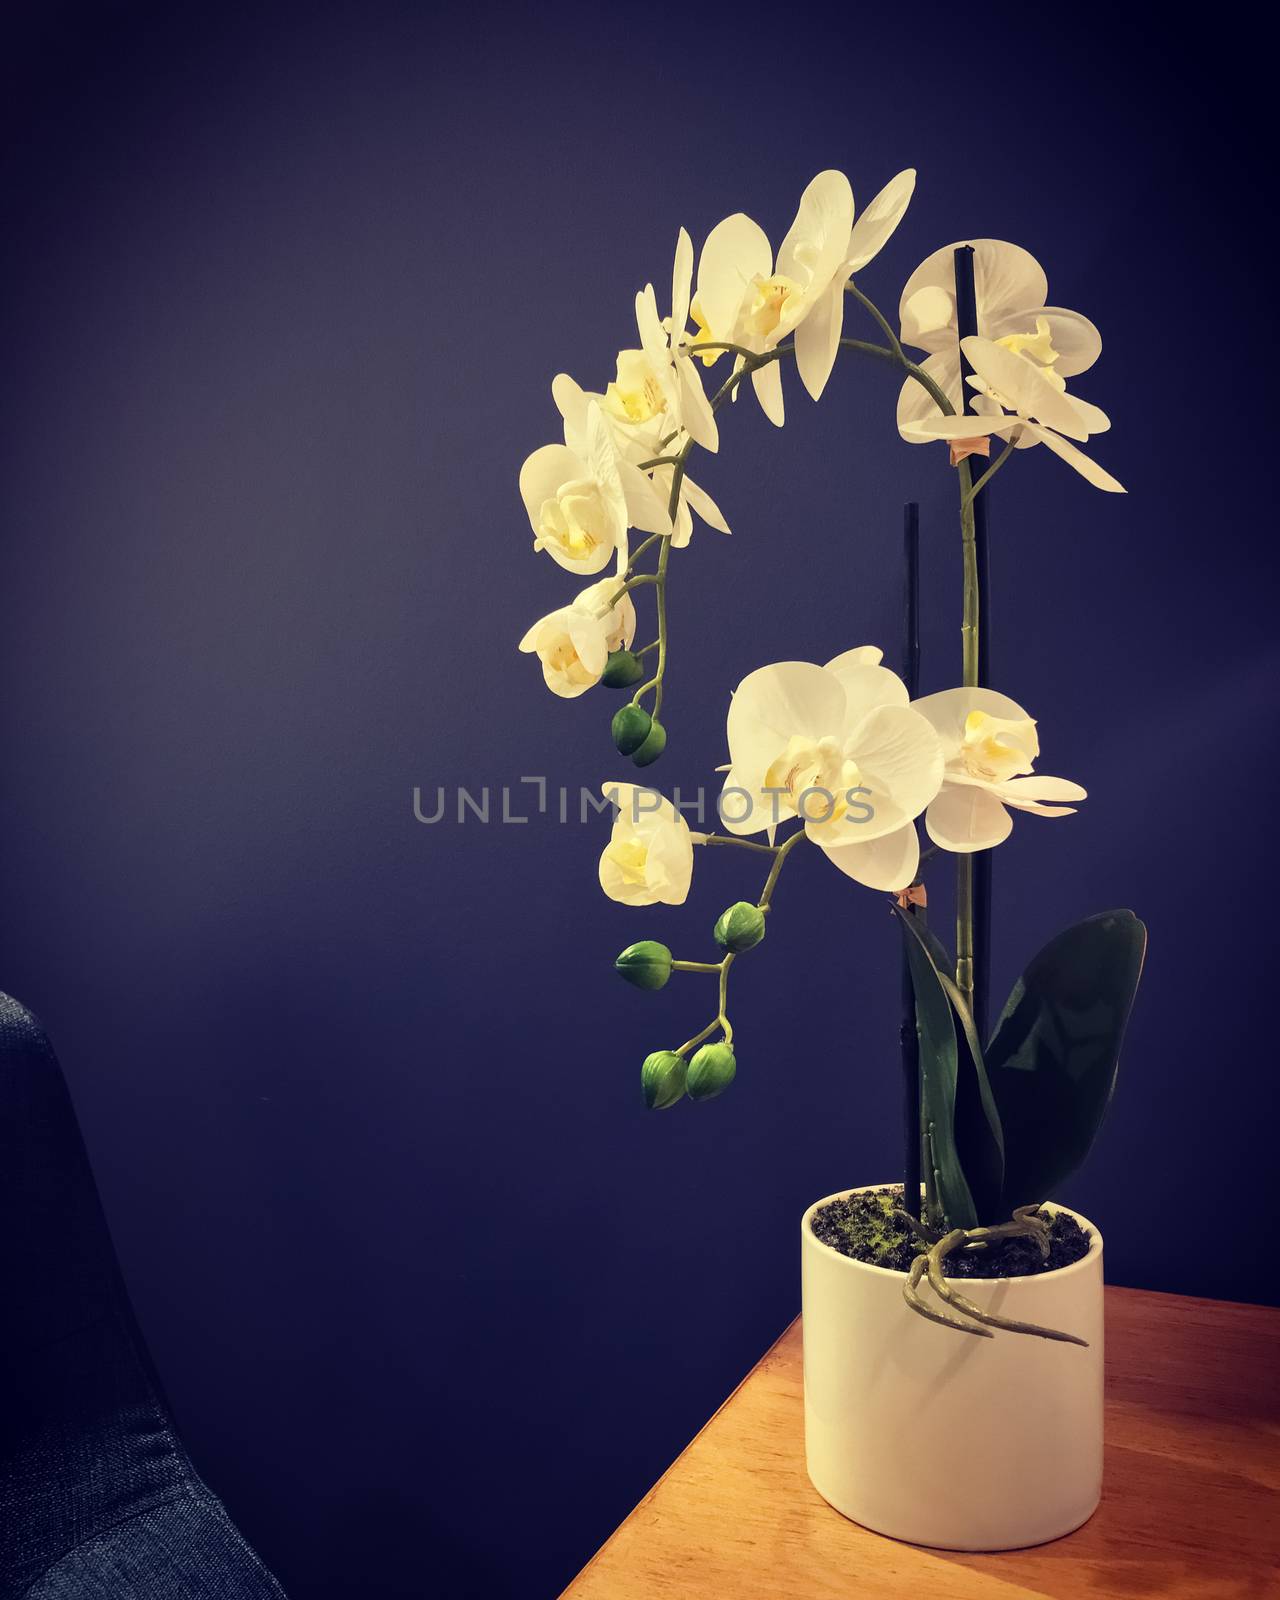 Elegant white orchid on a table, on blue wall background. Home decor.